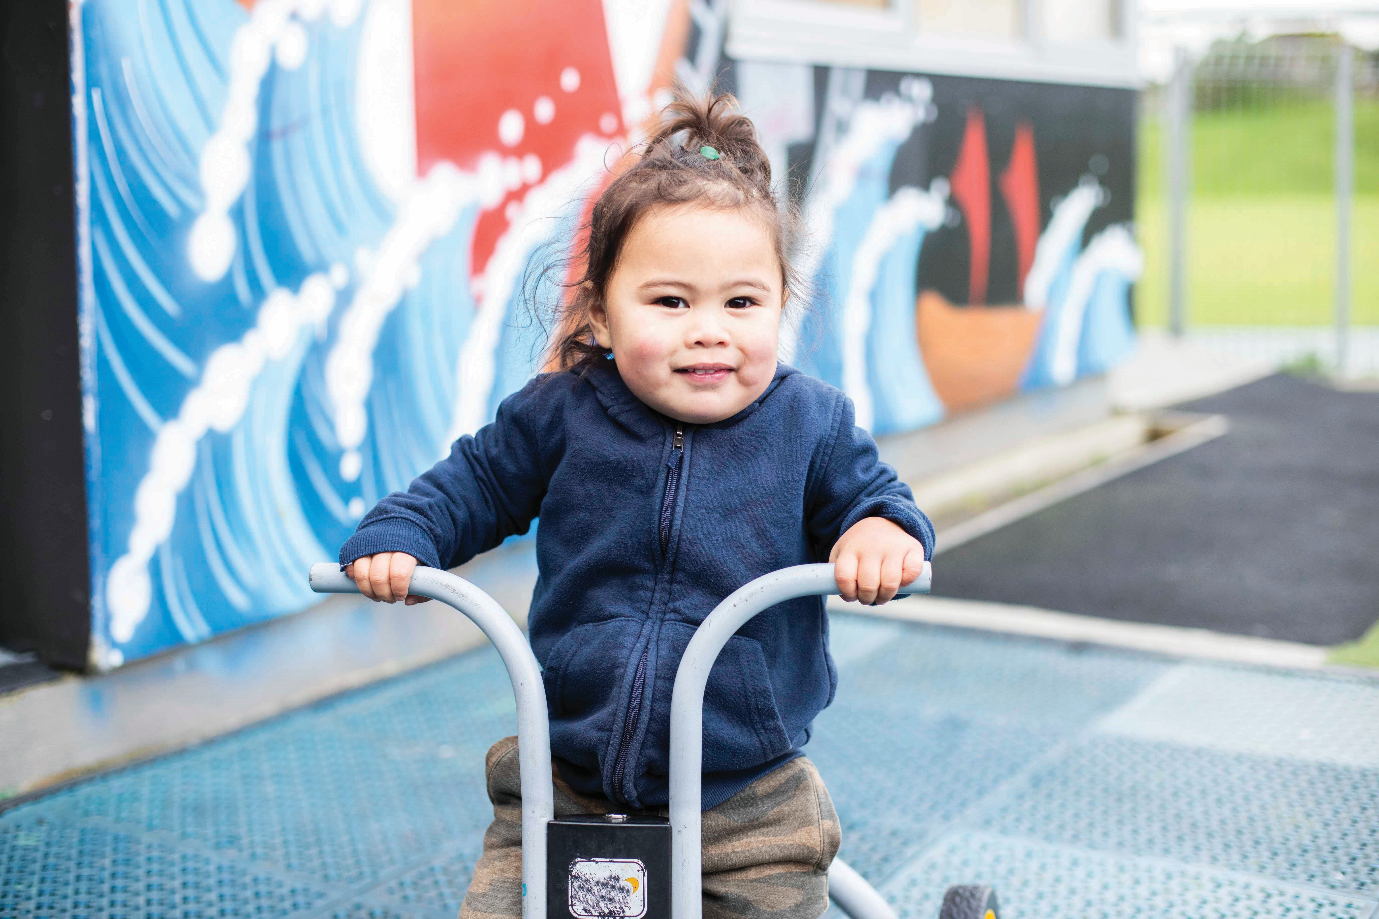 A tamariki on a tricycle smiling at the camera.